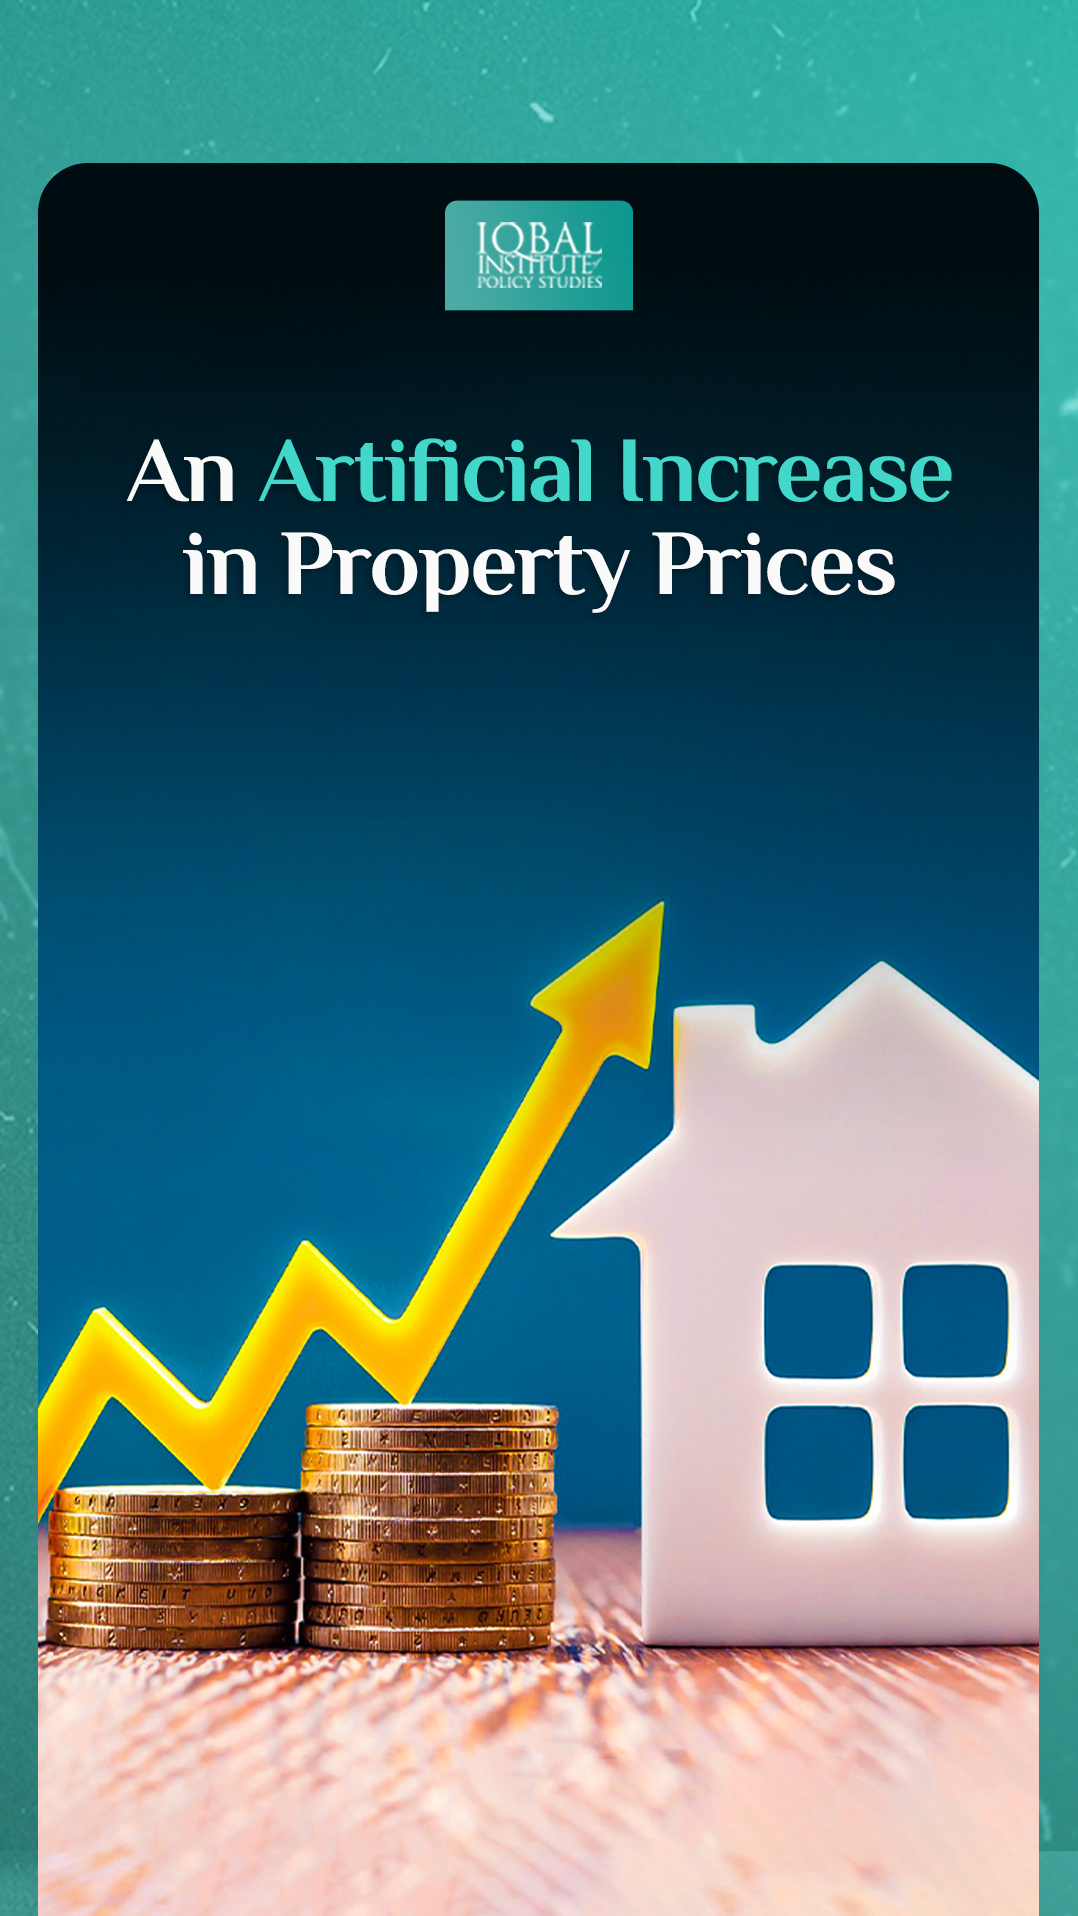 An Artificial Increase in Property Prices